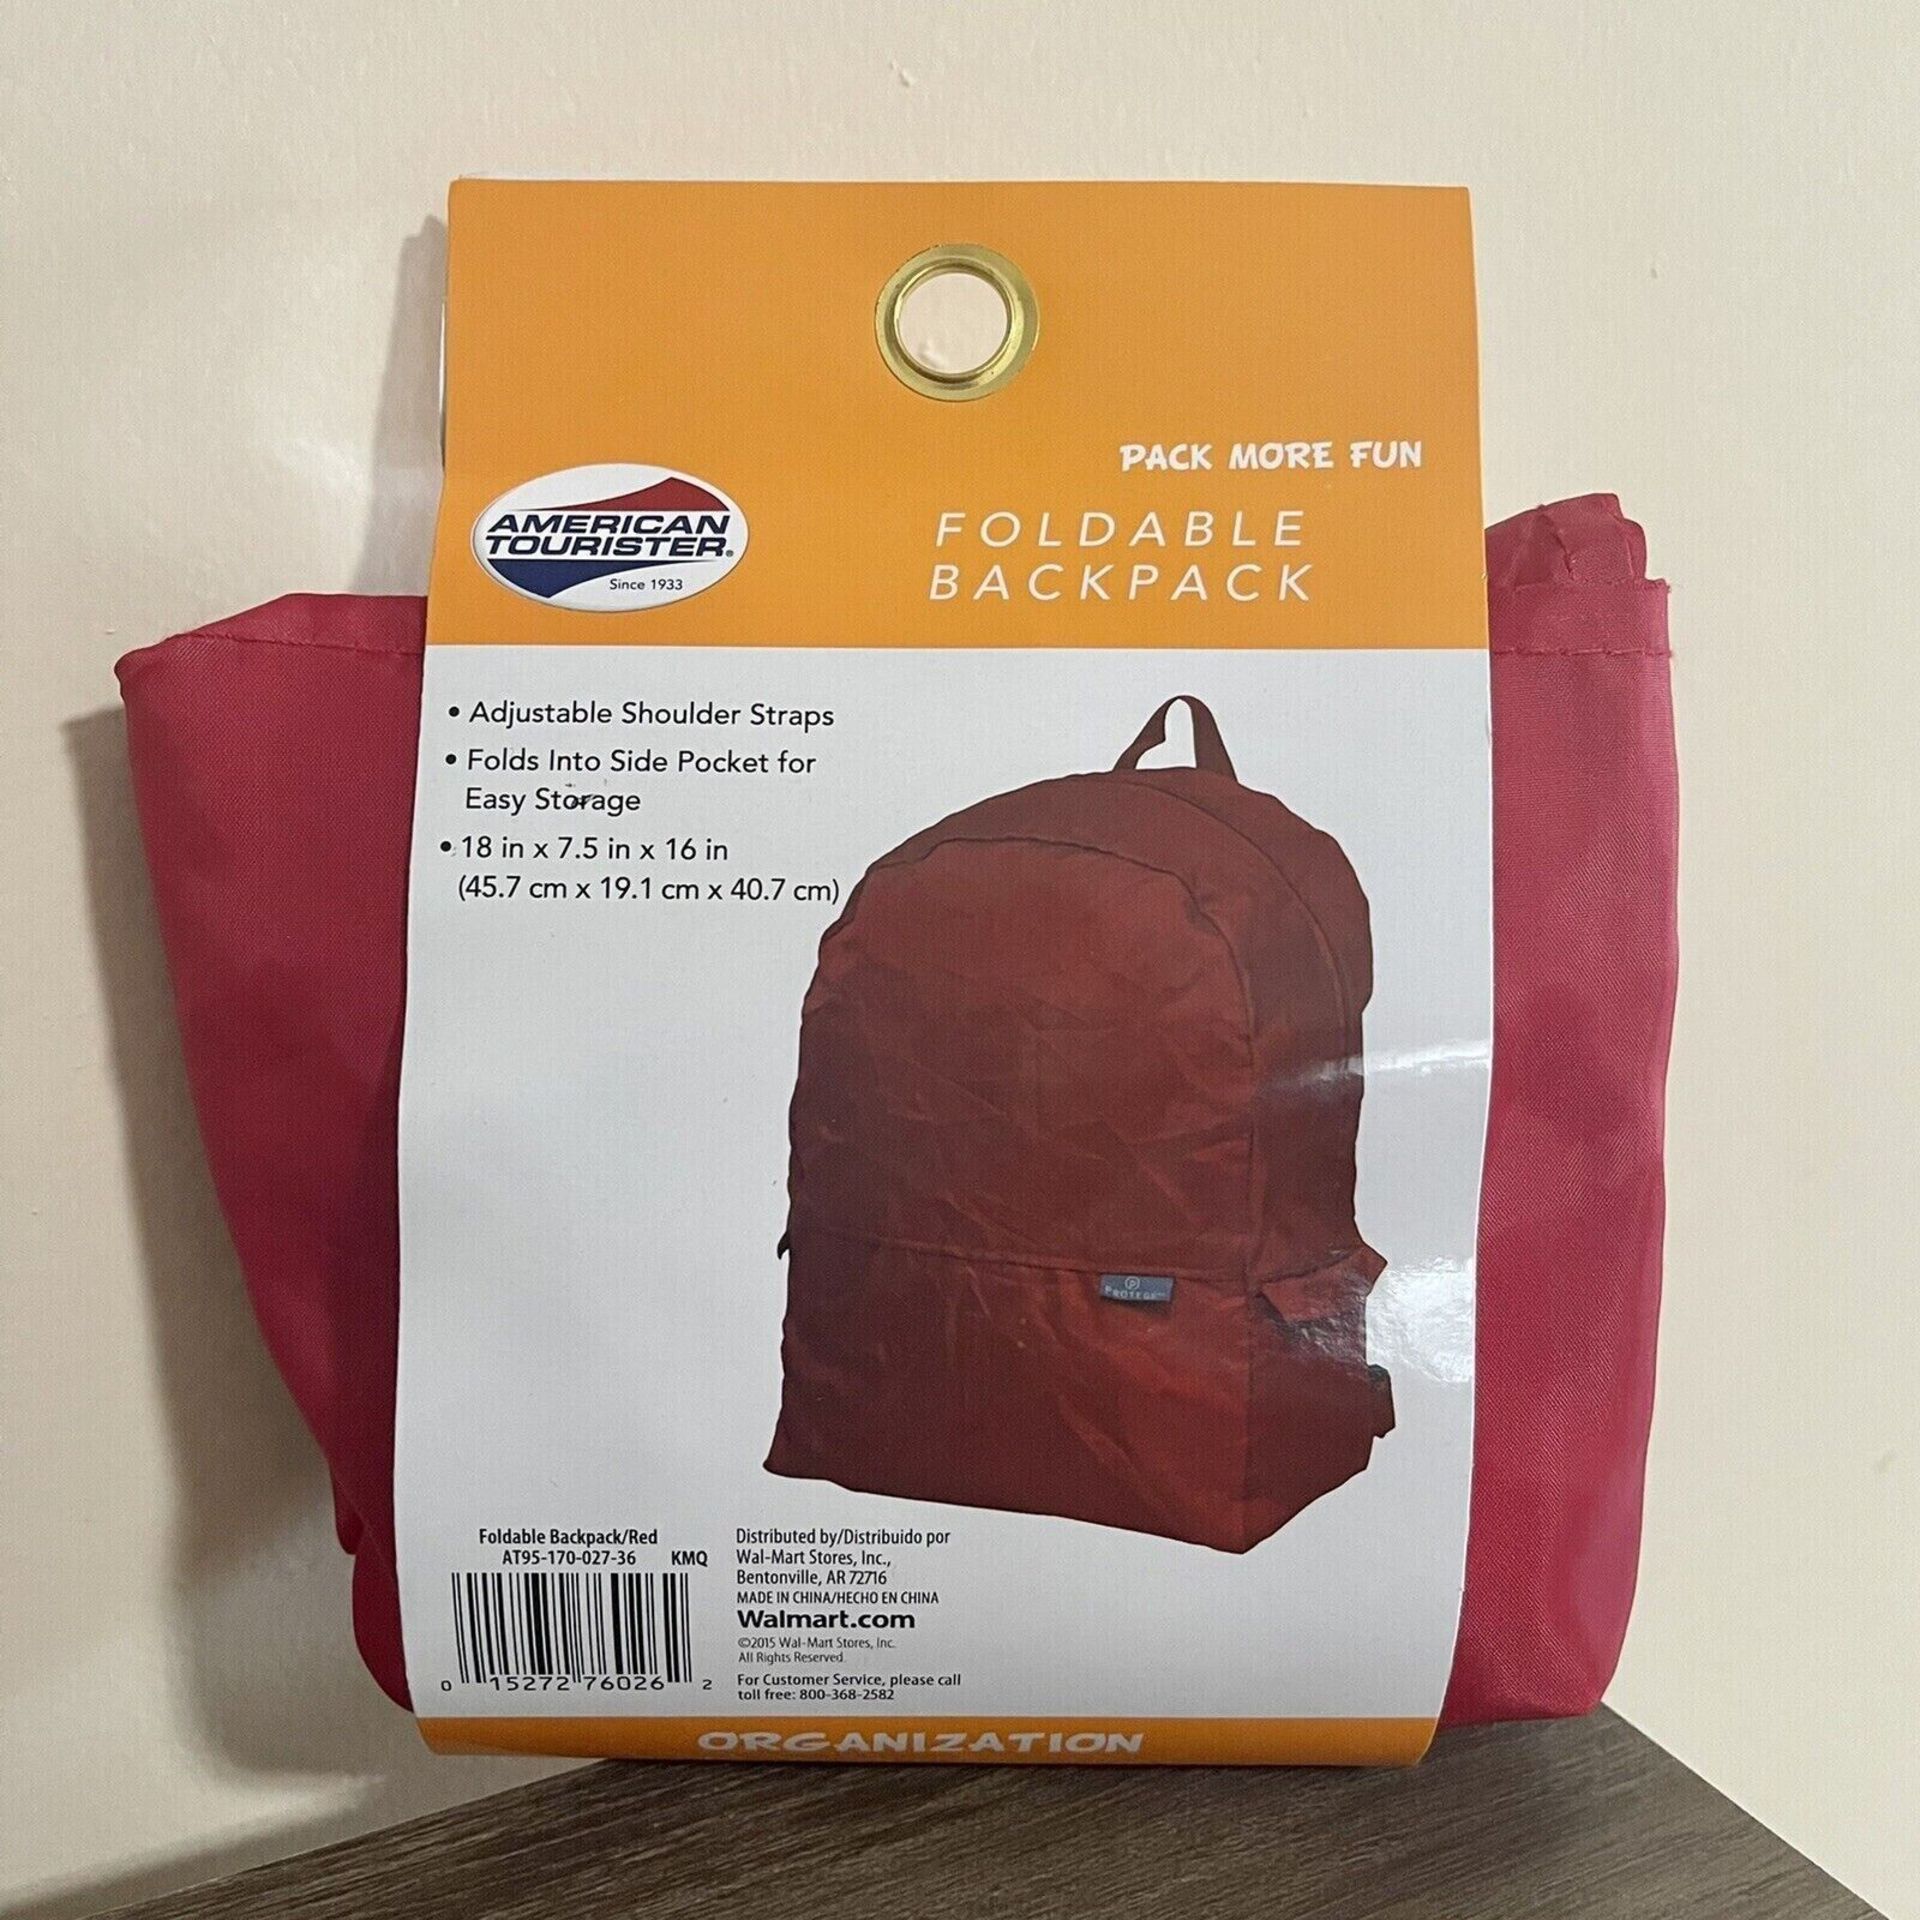 JOBLOT 200 X NEW BACKPACKS - MIX OF RED AND GREY - 45.7 X 40.7CM - - Image 4 of 4